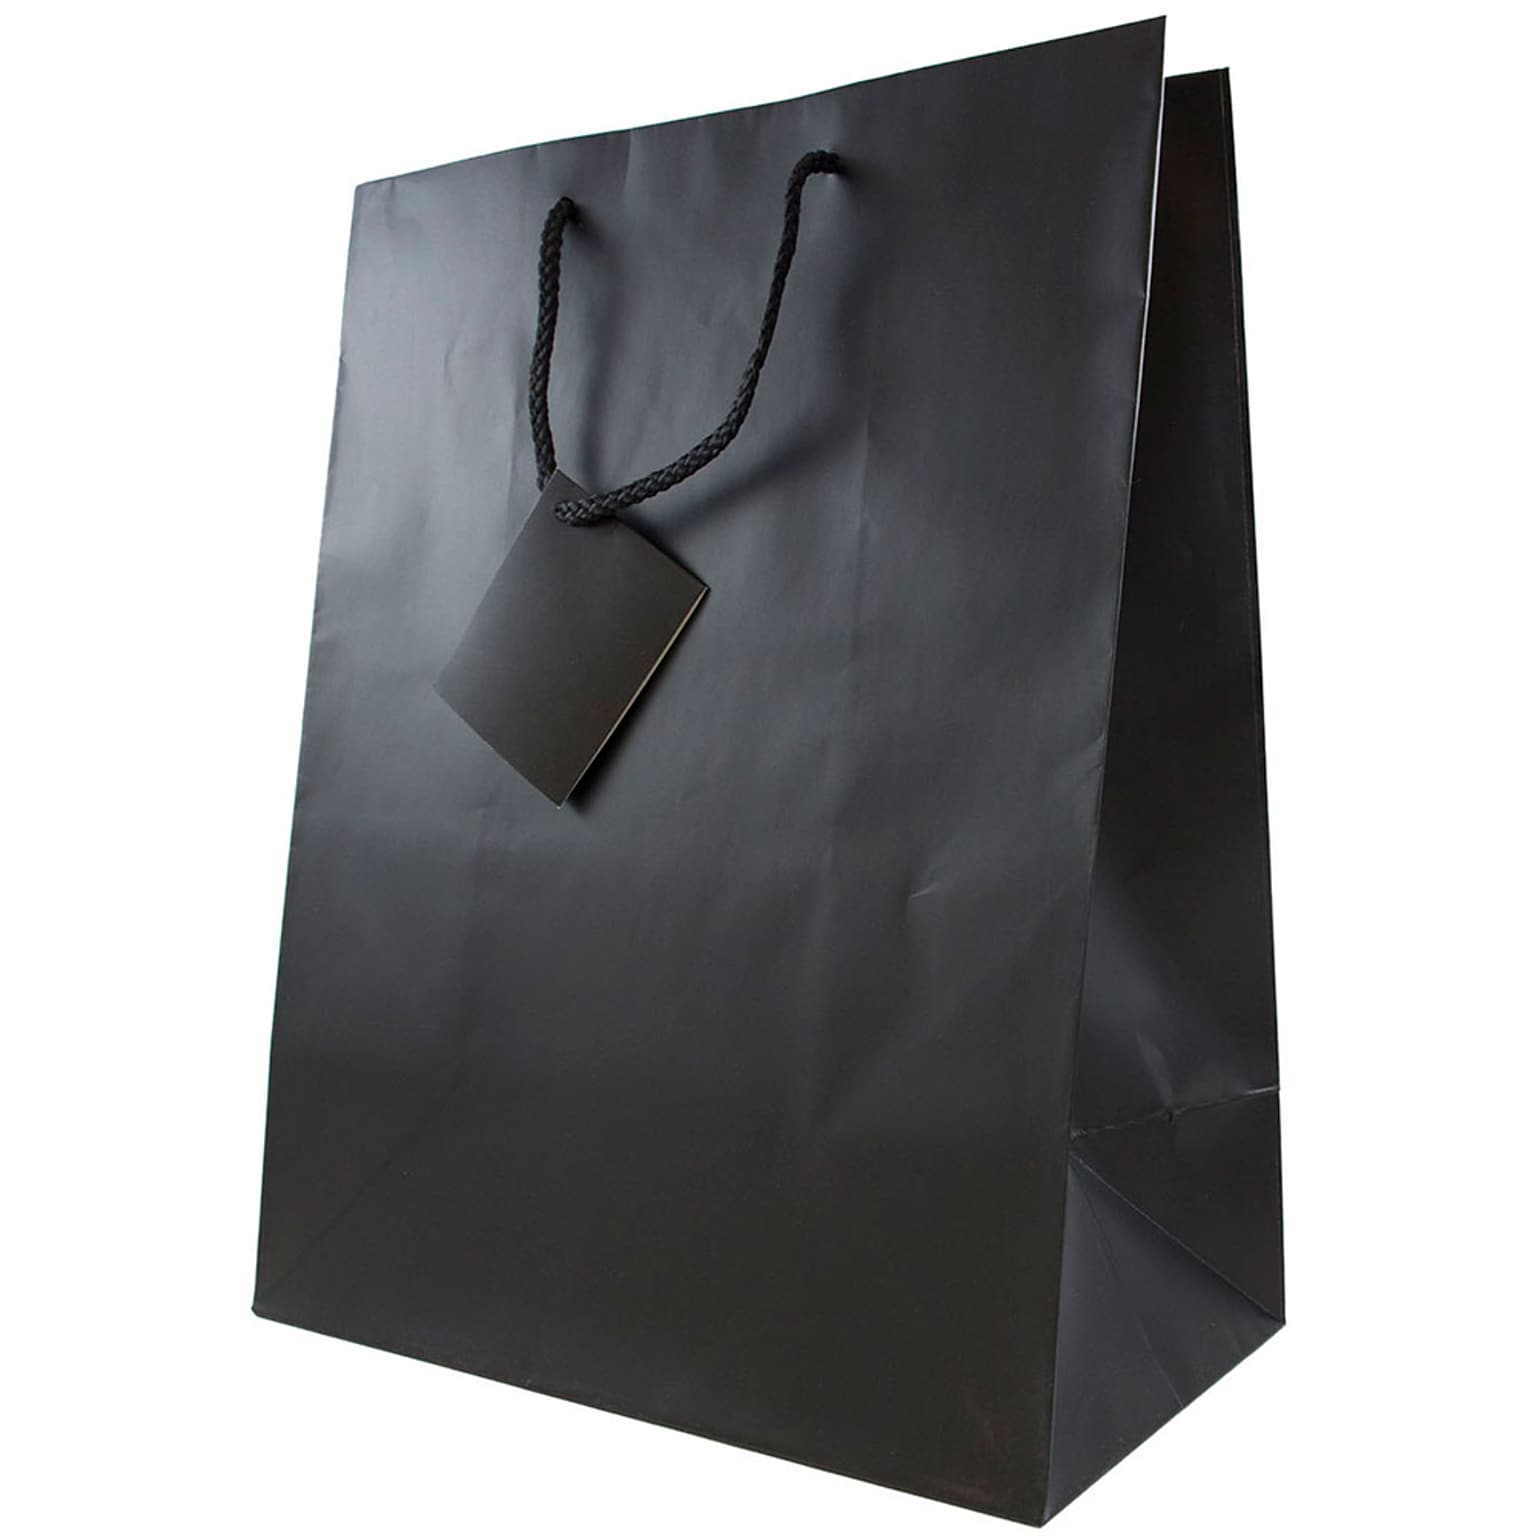 JAM PAPER Gift Bags with Rope Handles, Large, 10 x 13 x 5, Black Matte, 3/Pack (673MABLA)